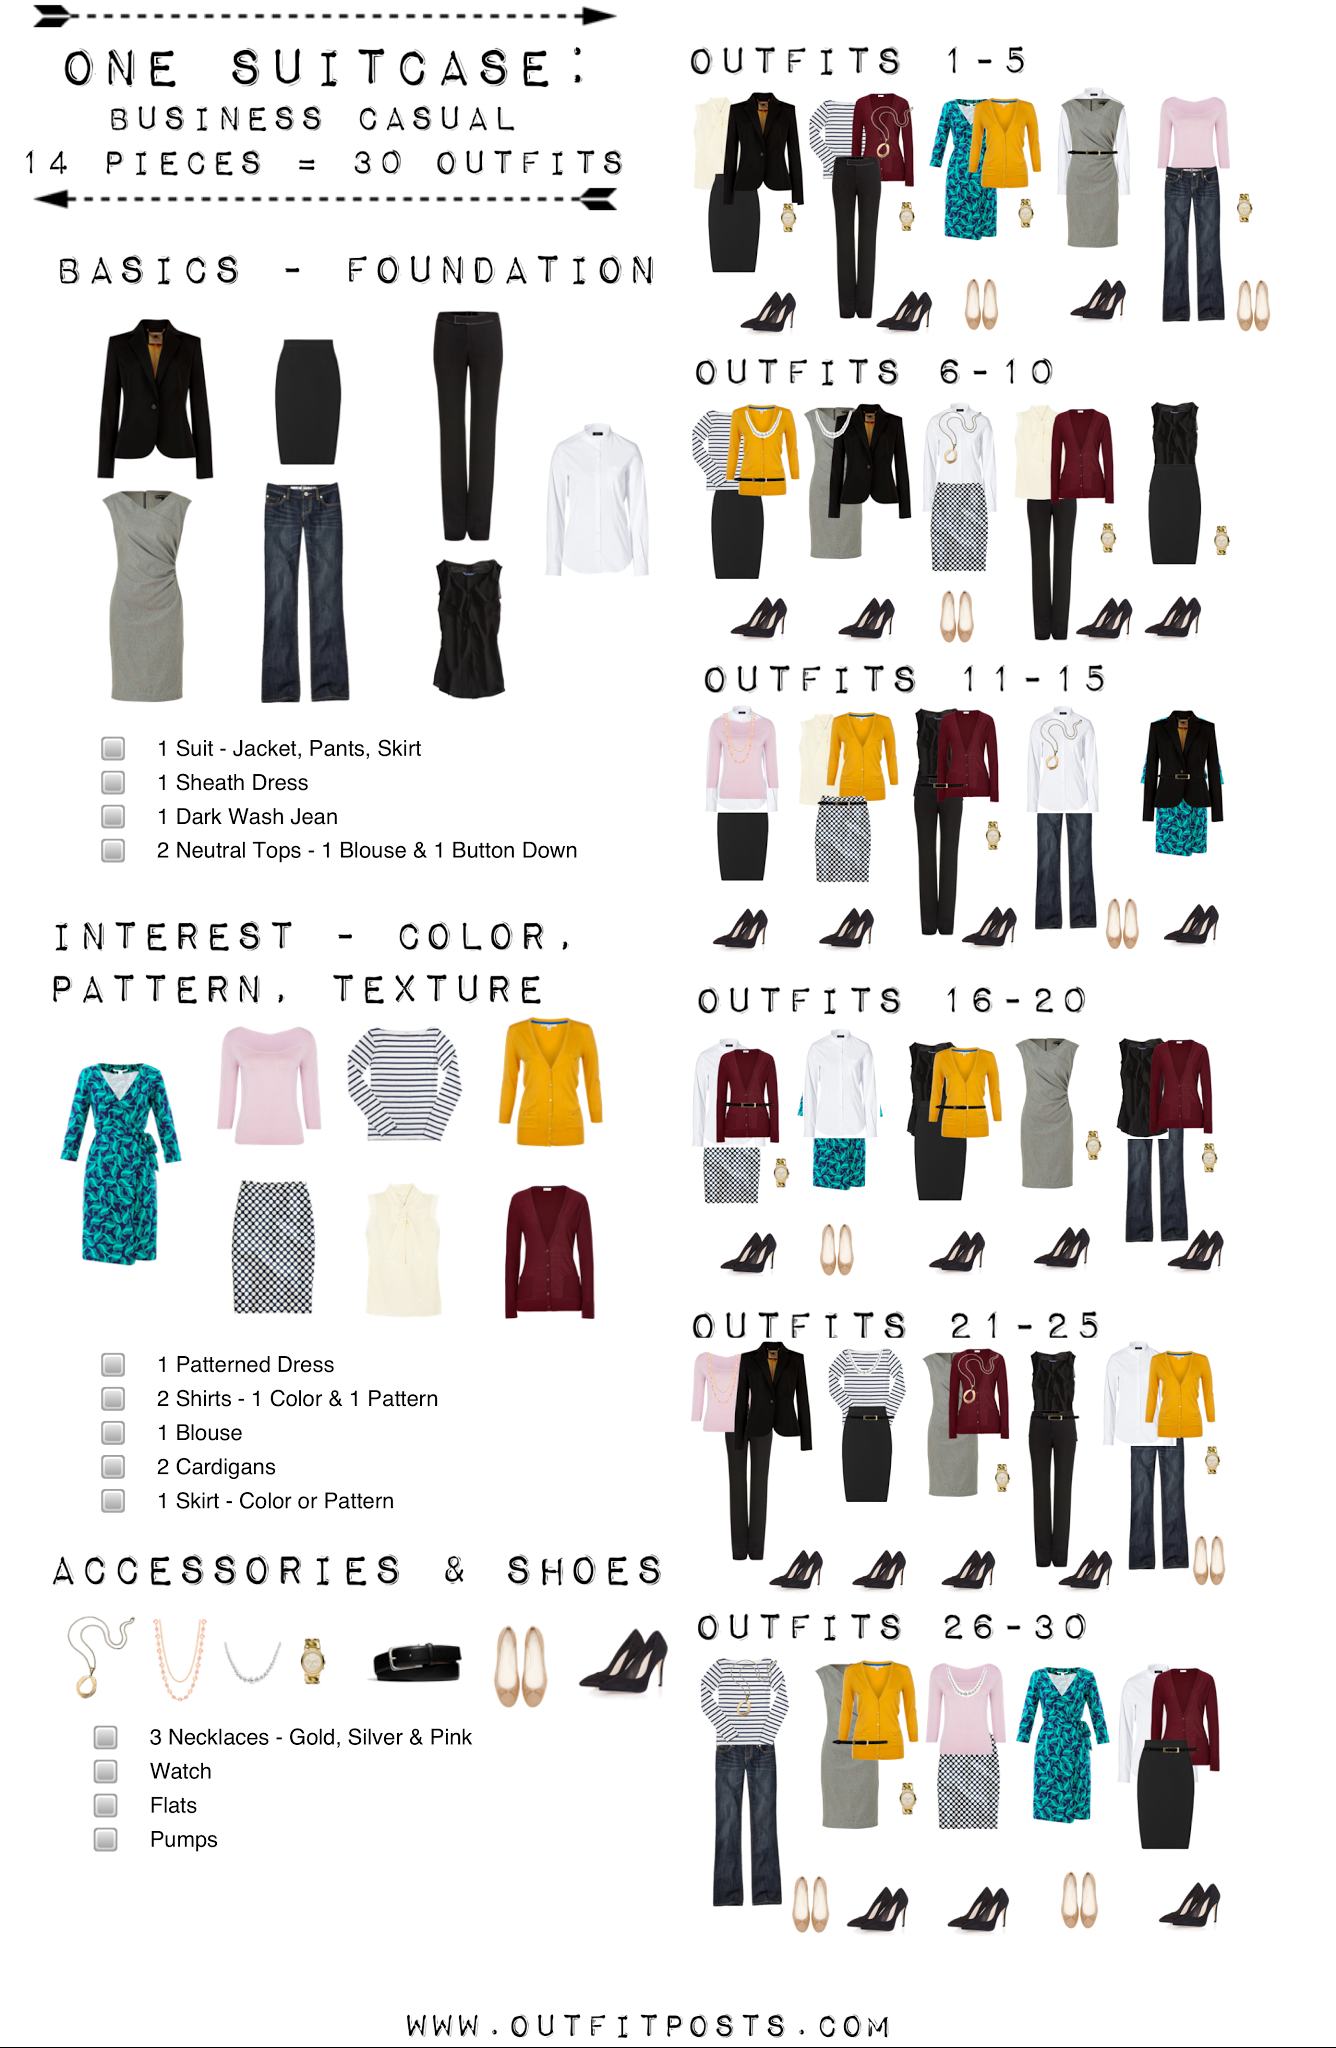 Outfit Posts